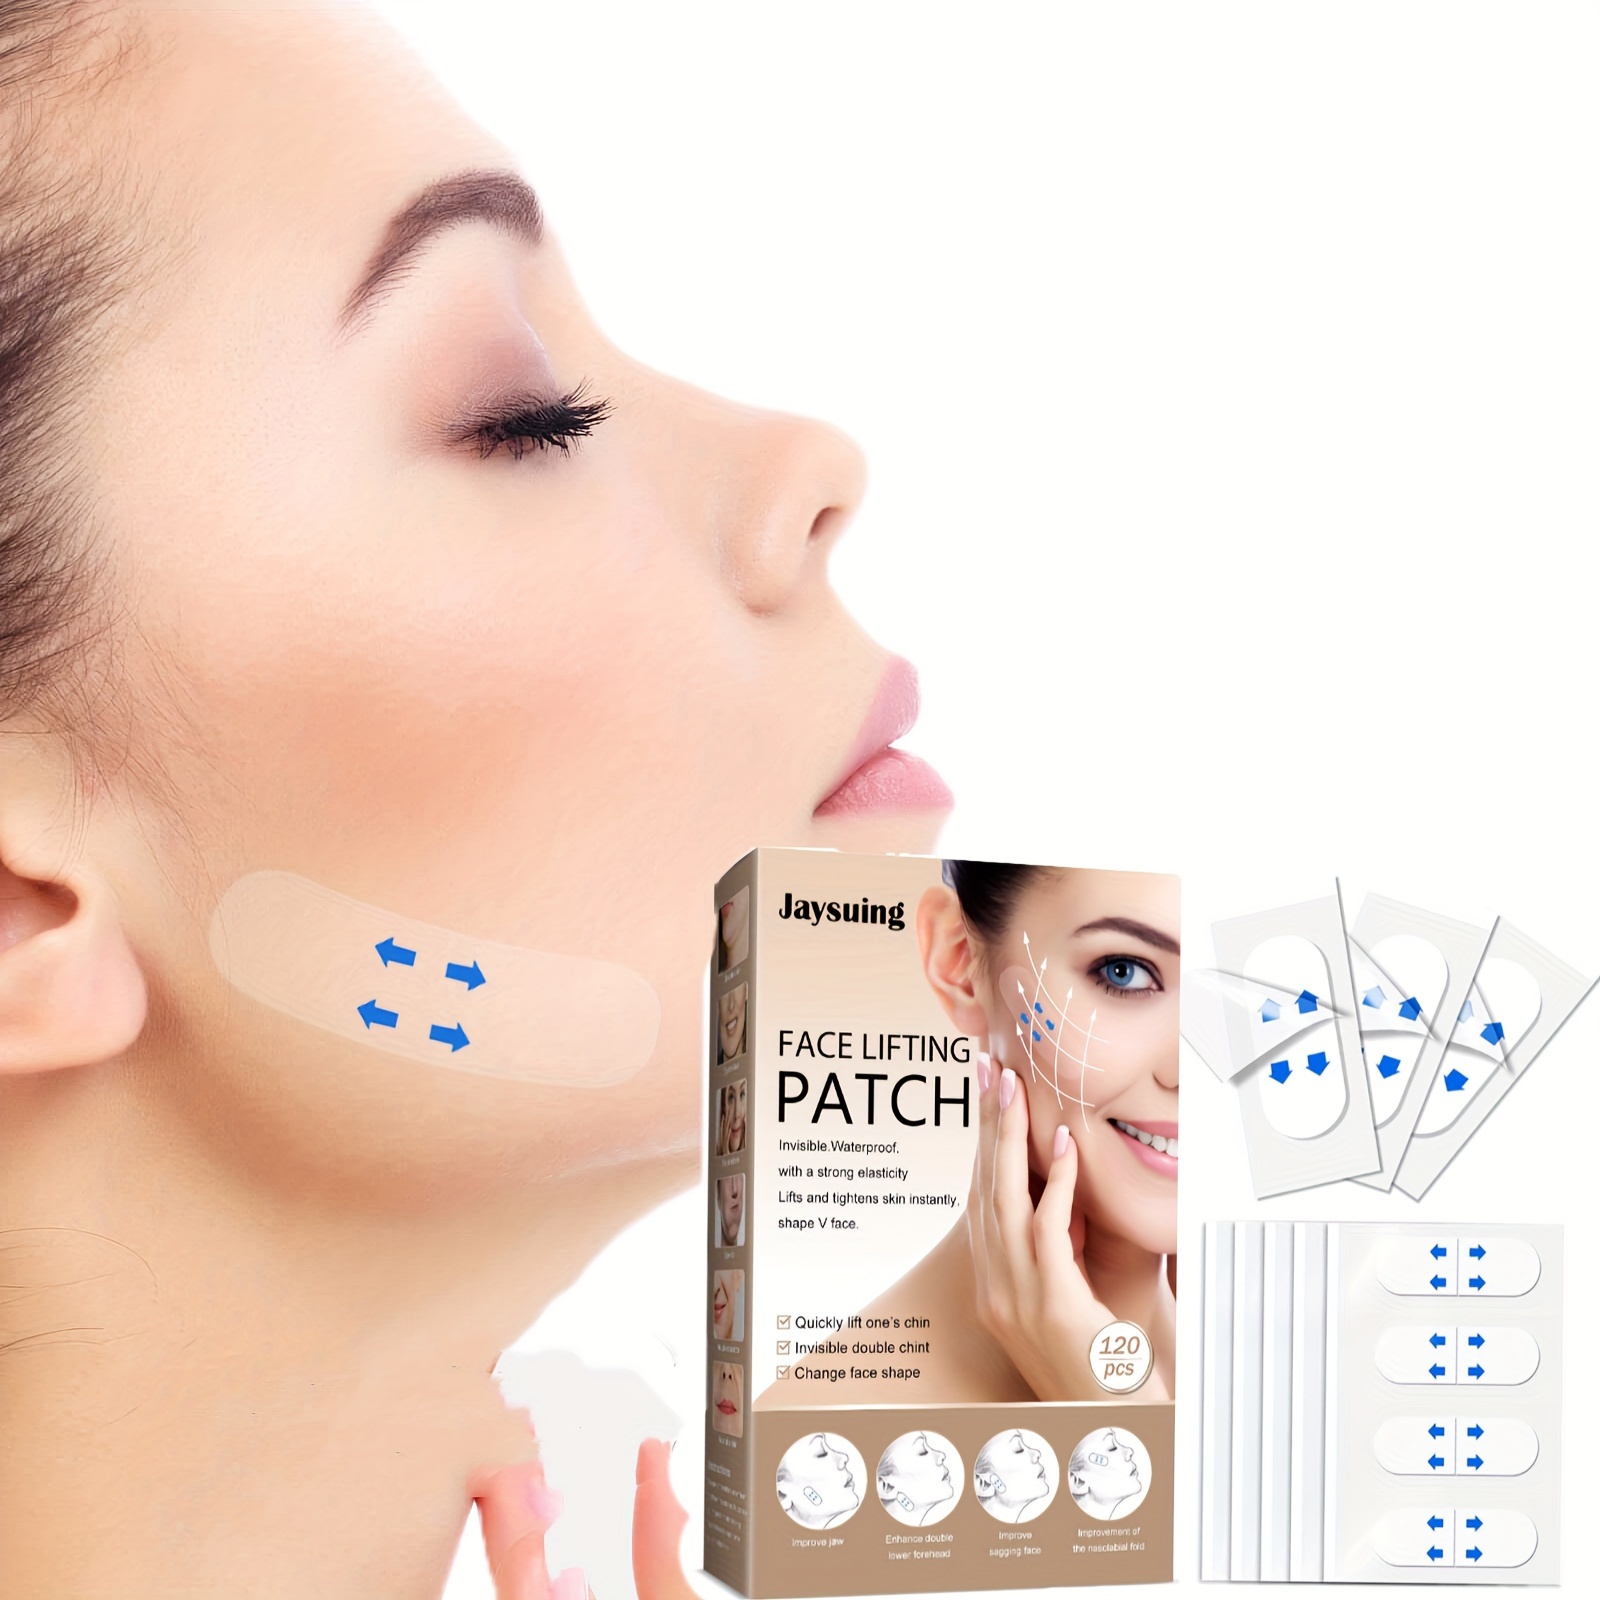 Face Lift Tape, Face Lift Sticker Ultra-thin Invisible Face Tape For  Instant Face, V-face Neck And Eye Lift (Skin Tone 4 Pack+20 Patches)